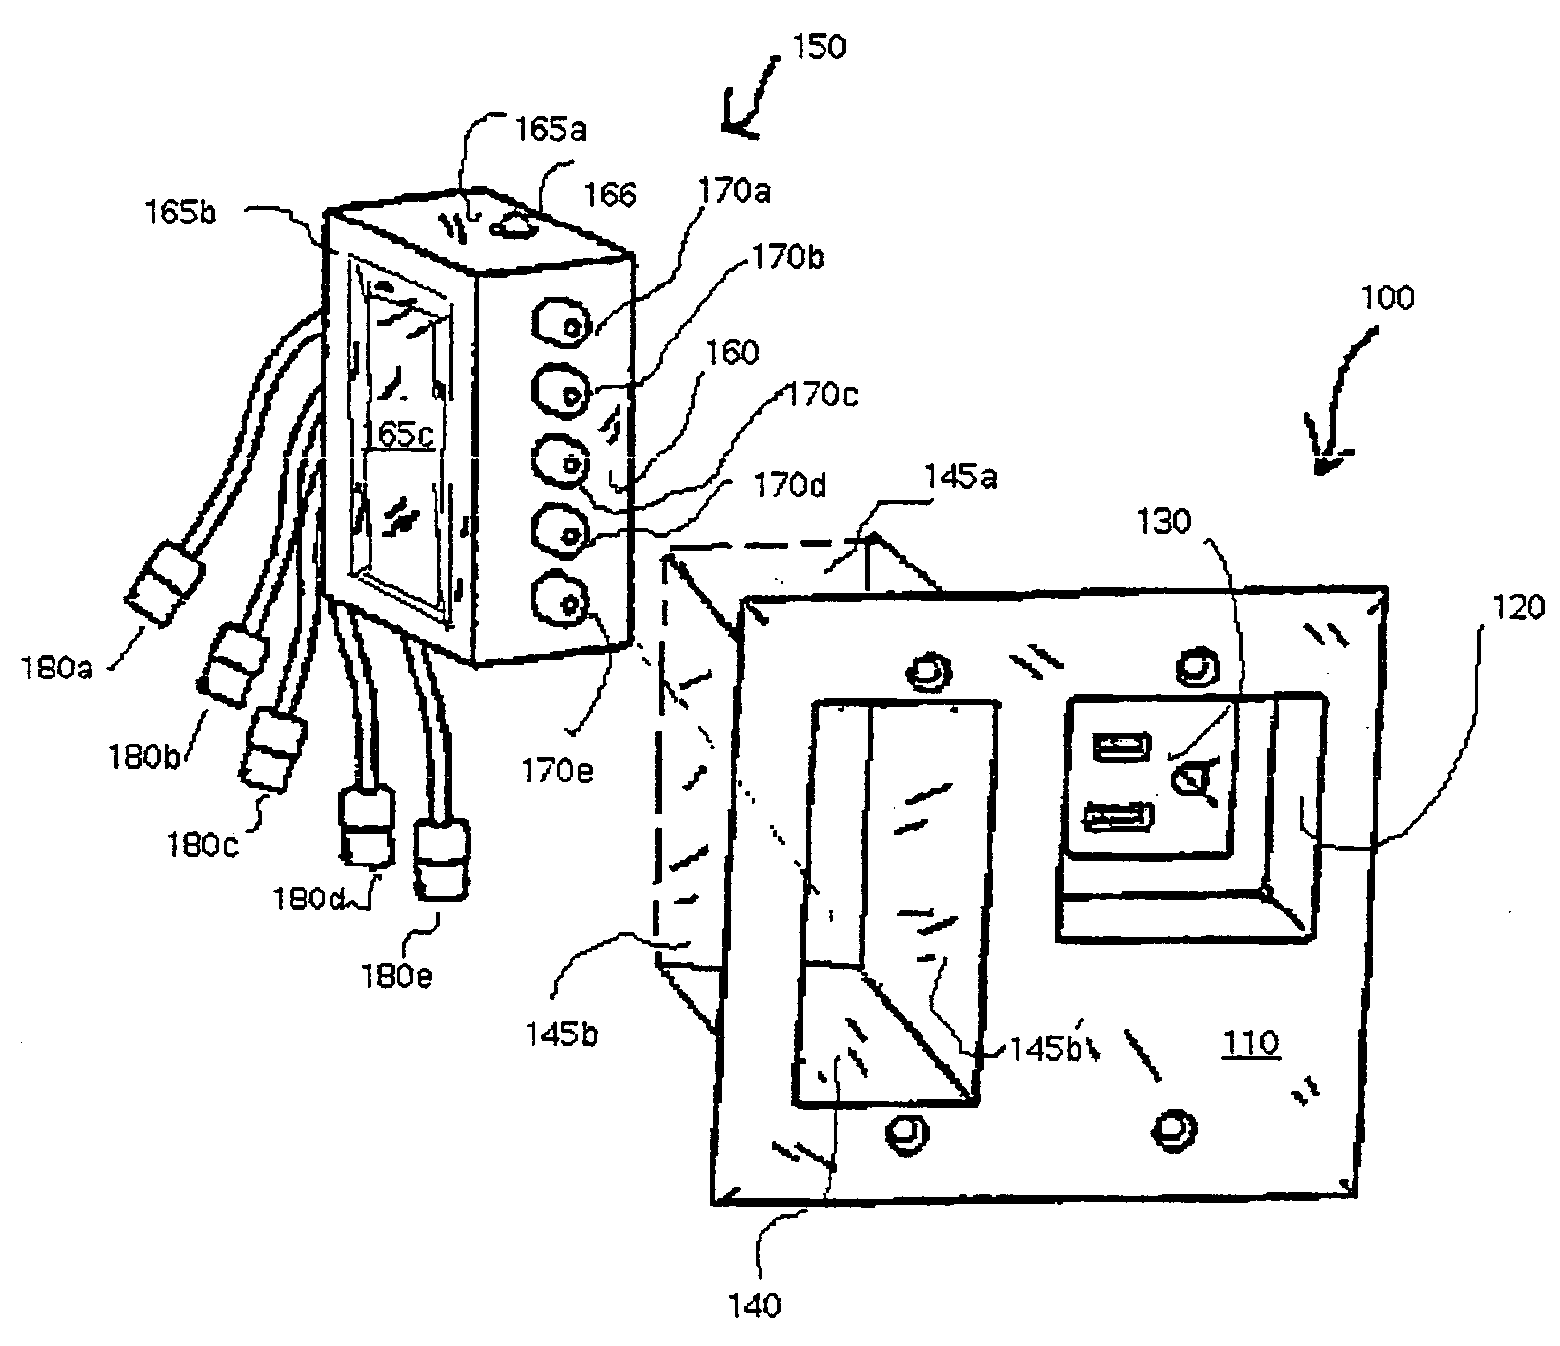 Modular signal and power connection device